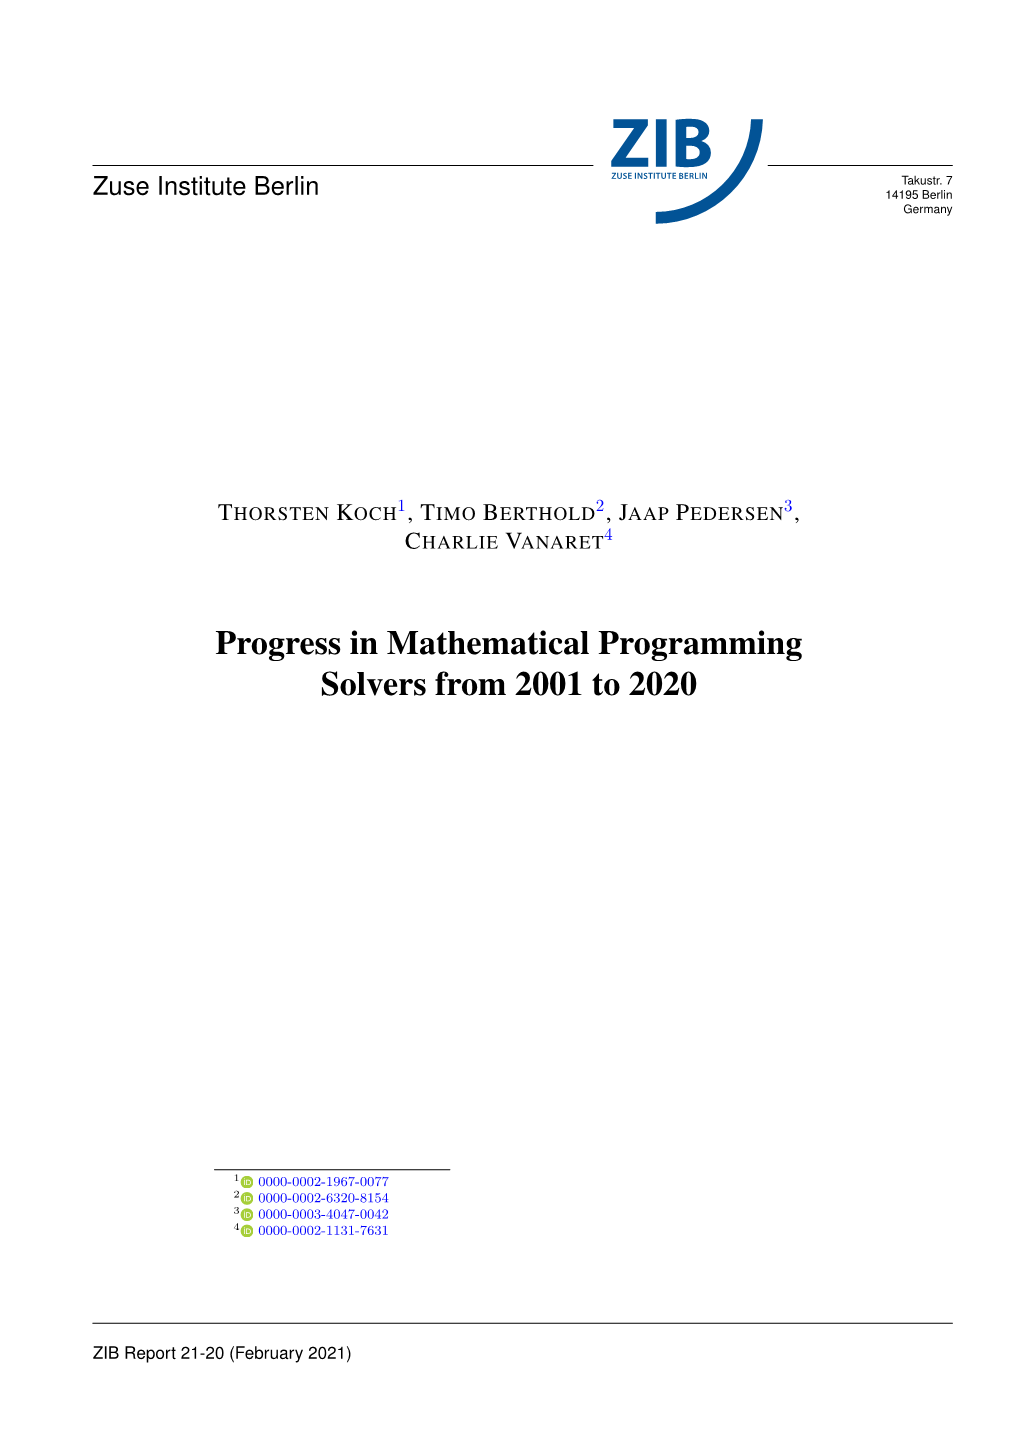 Progress in Mathematical Programming Solvers from 2001 to 2020